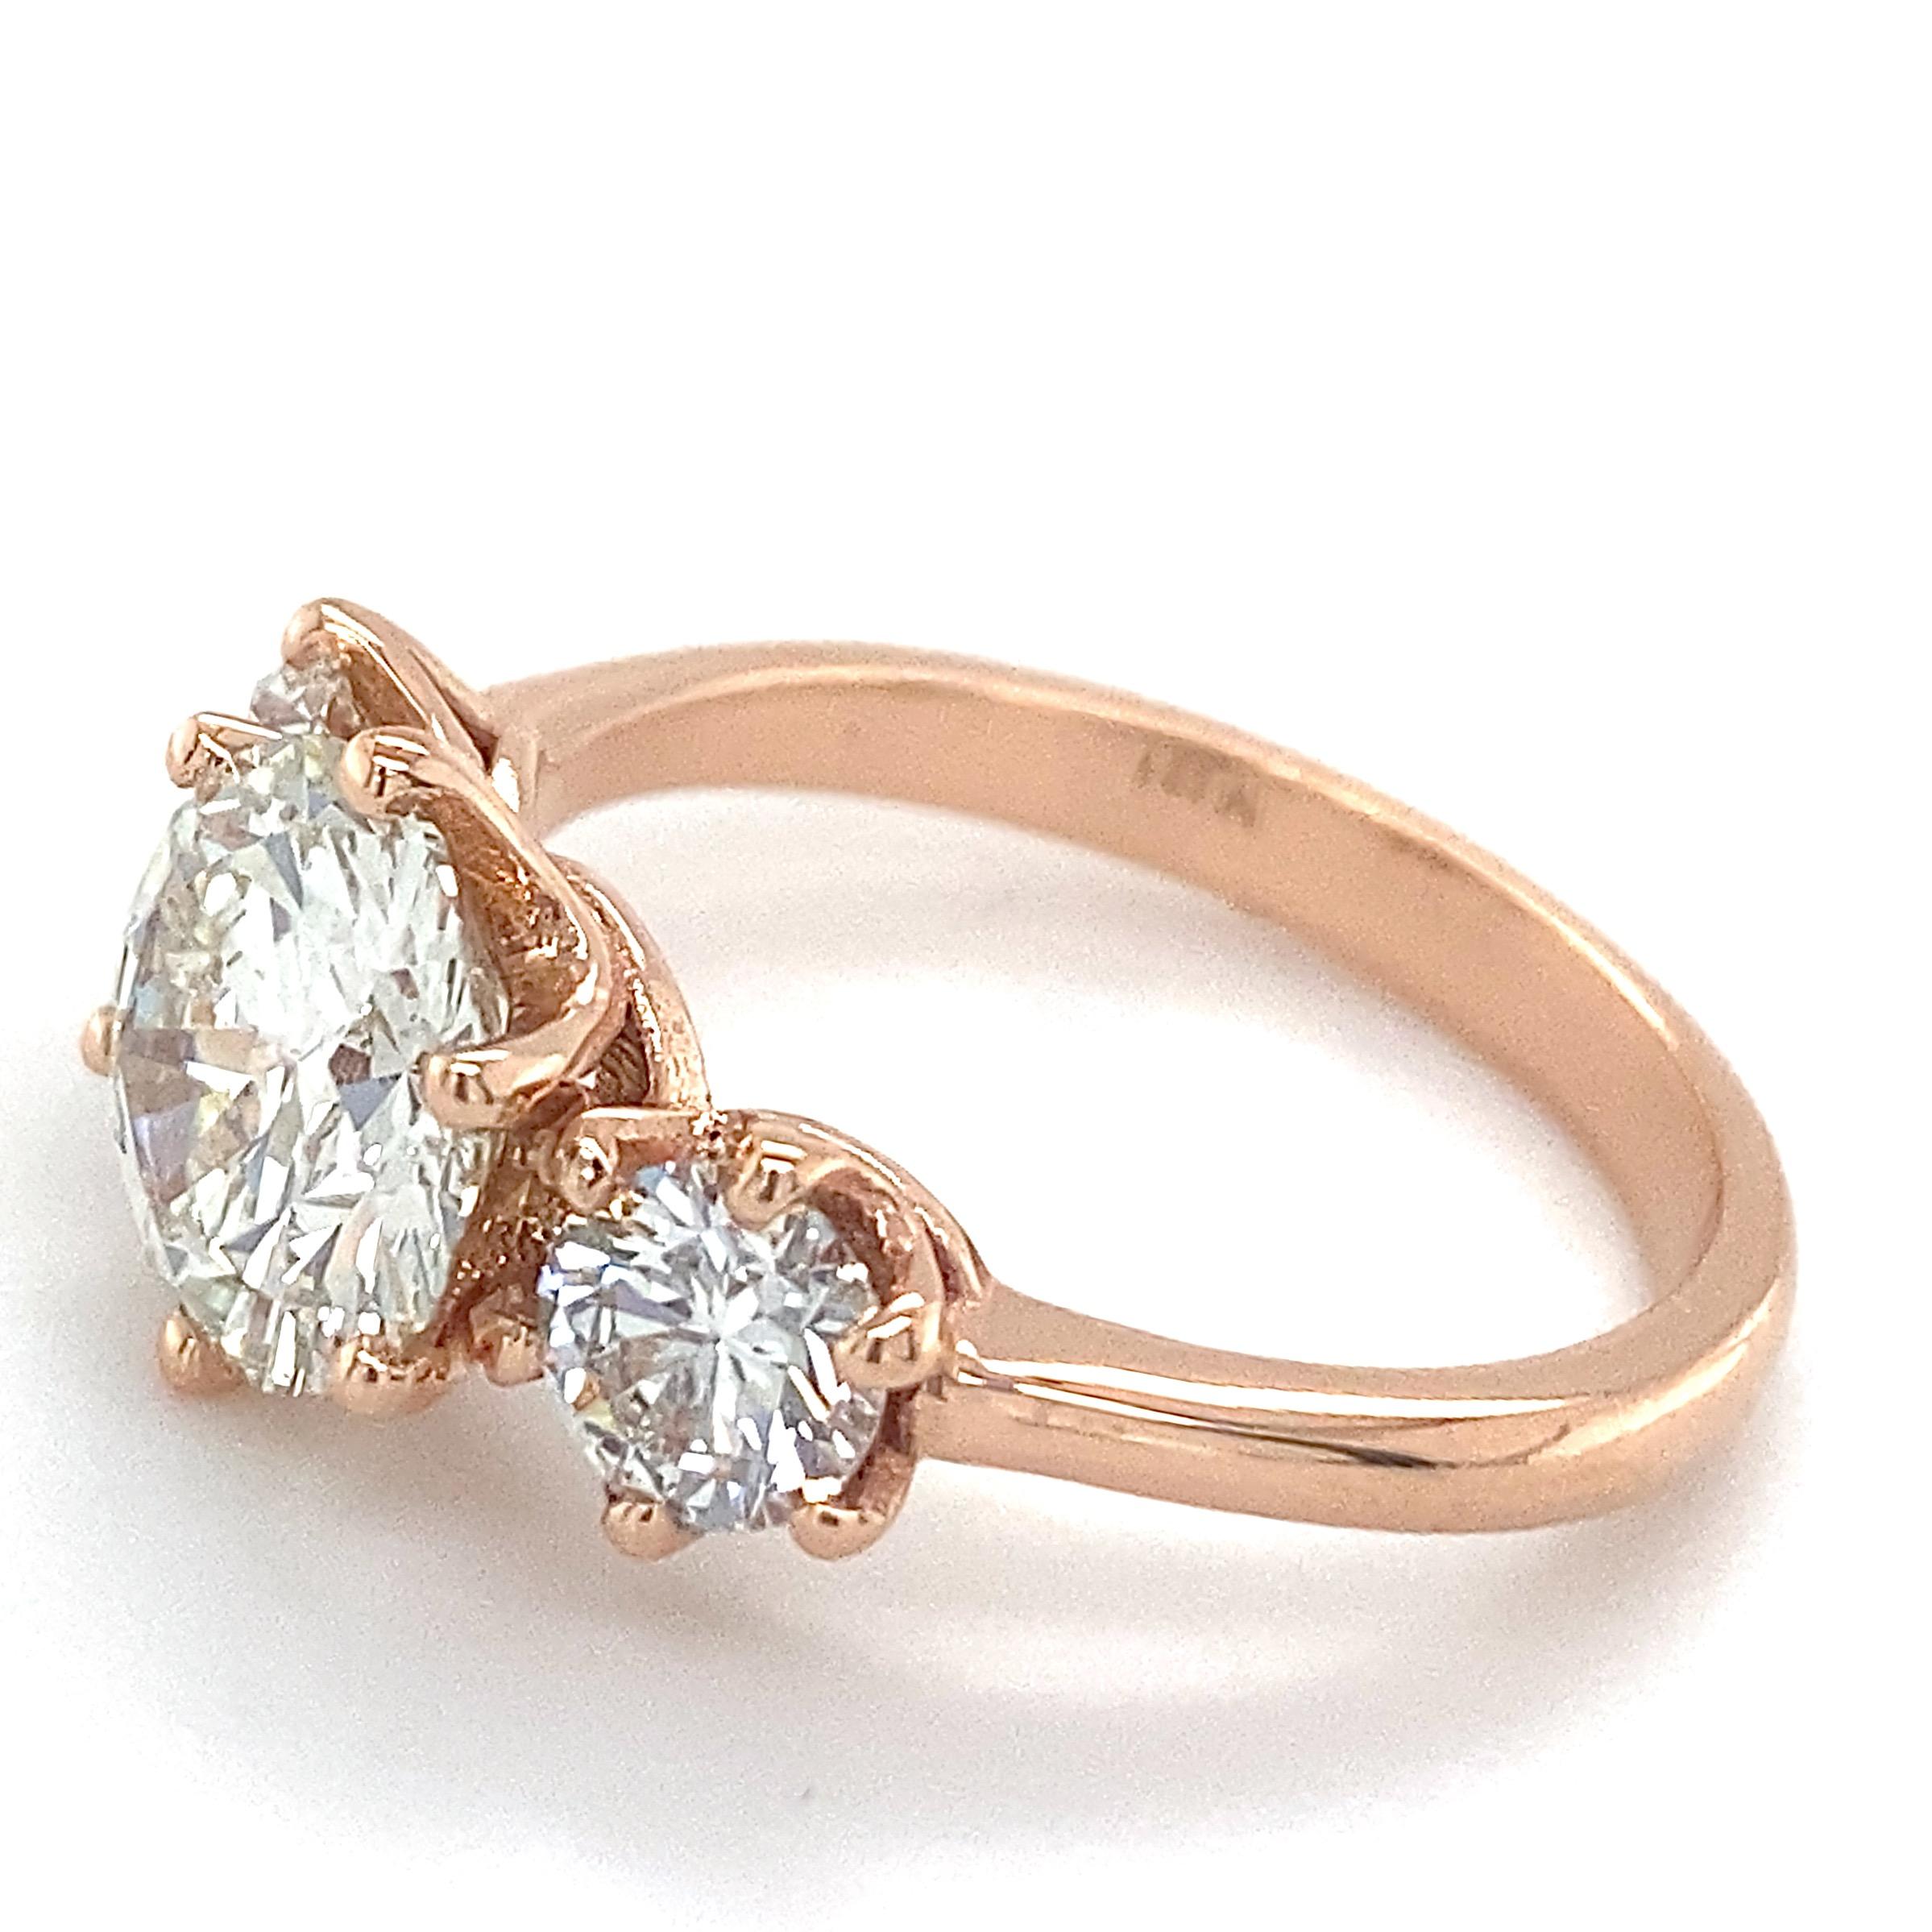 This classic three-stone ring by Eytan Brandes has a distinctive, unexpected edge in vibrant rose gold -- perfect as an engagement or anniversary ring.  

The center stone is a 1.55 carat brilliant cut round.  Included with the ring is a GIA